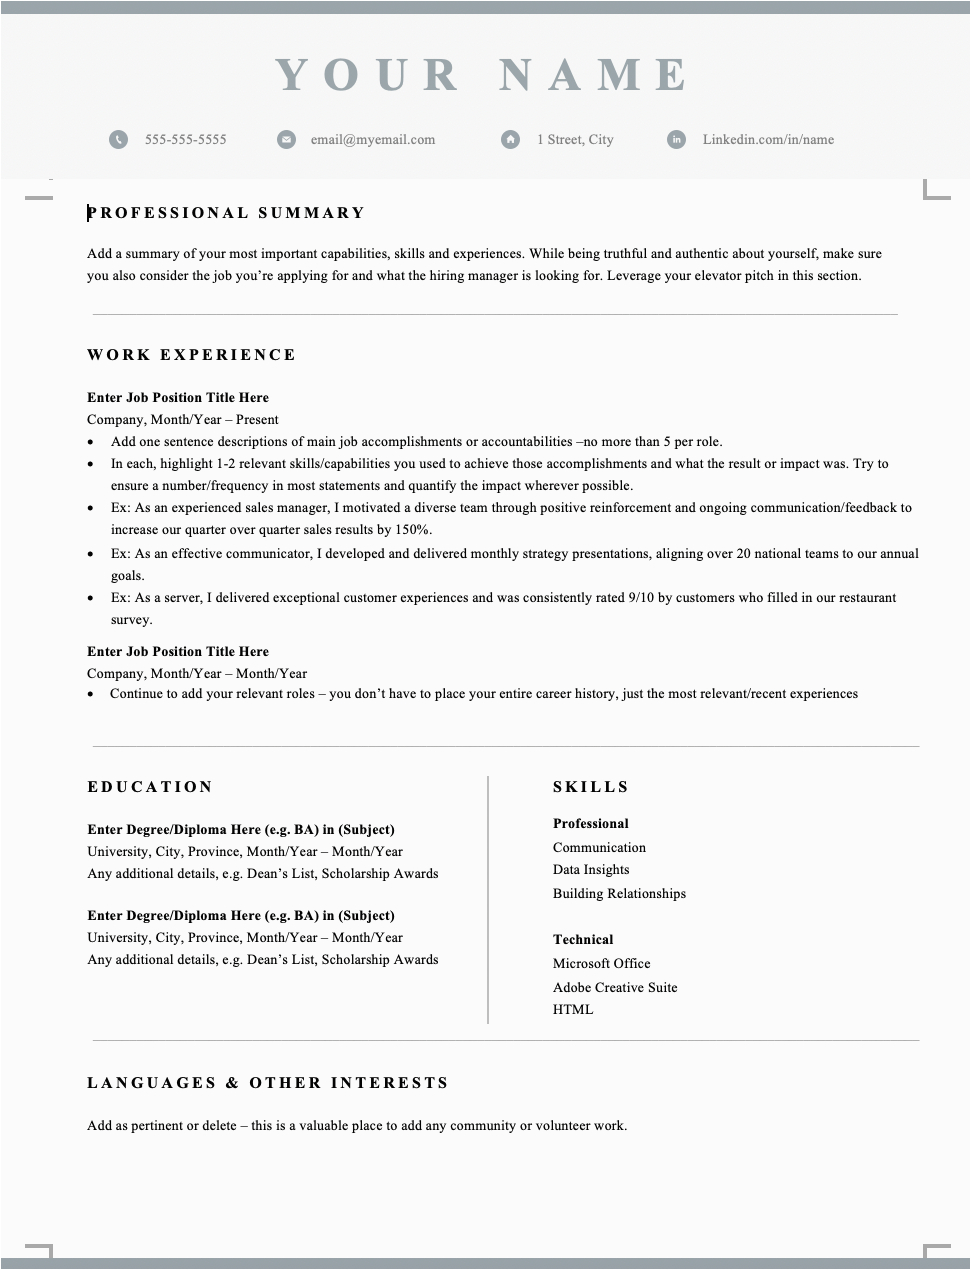 Sample Resume for Canada Post Job Canadian Resume & Cover Letter format Tips & Templates